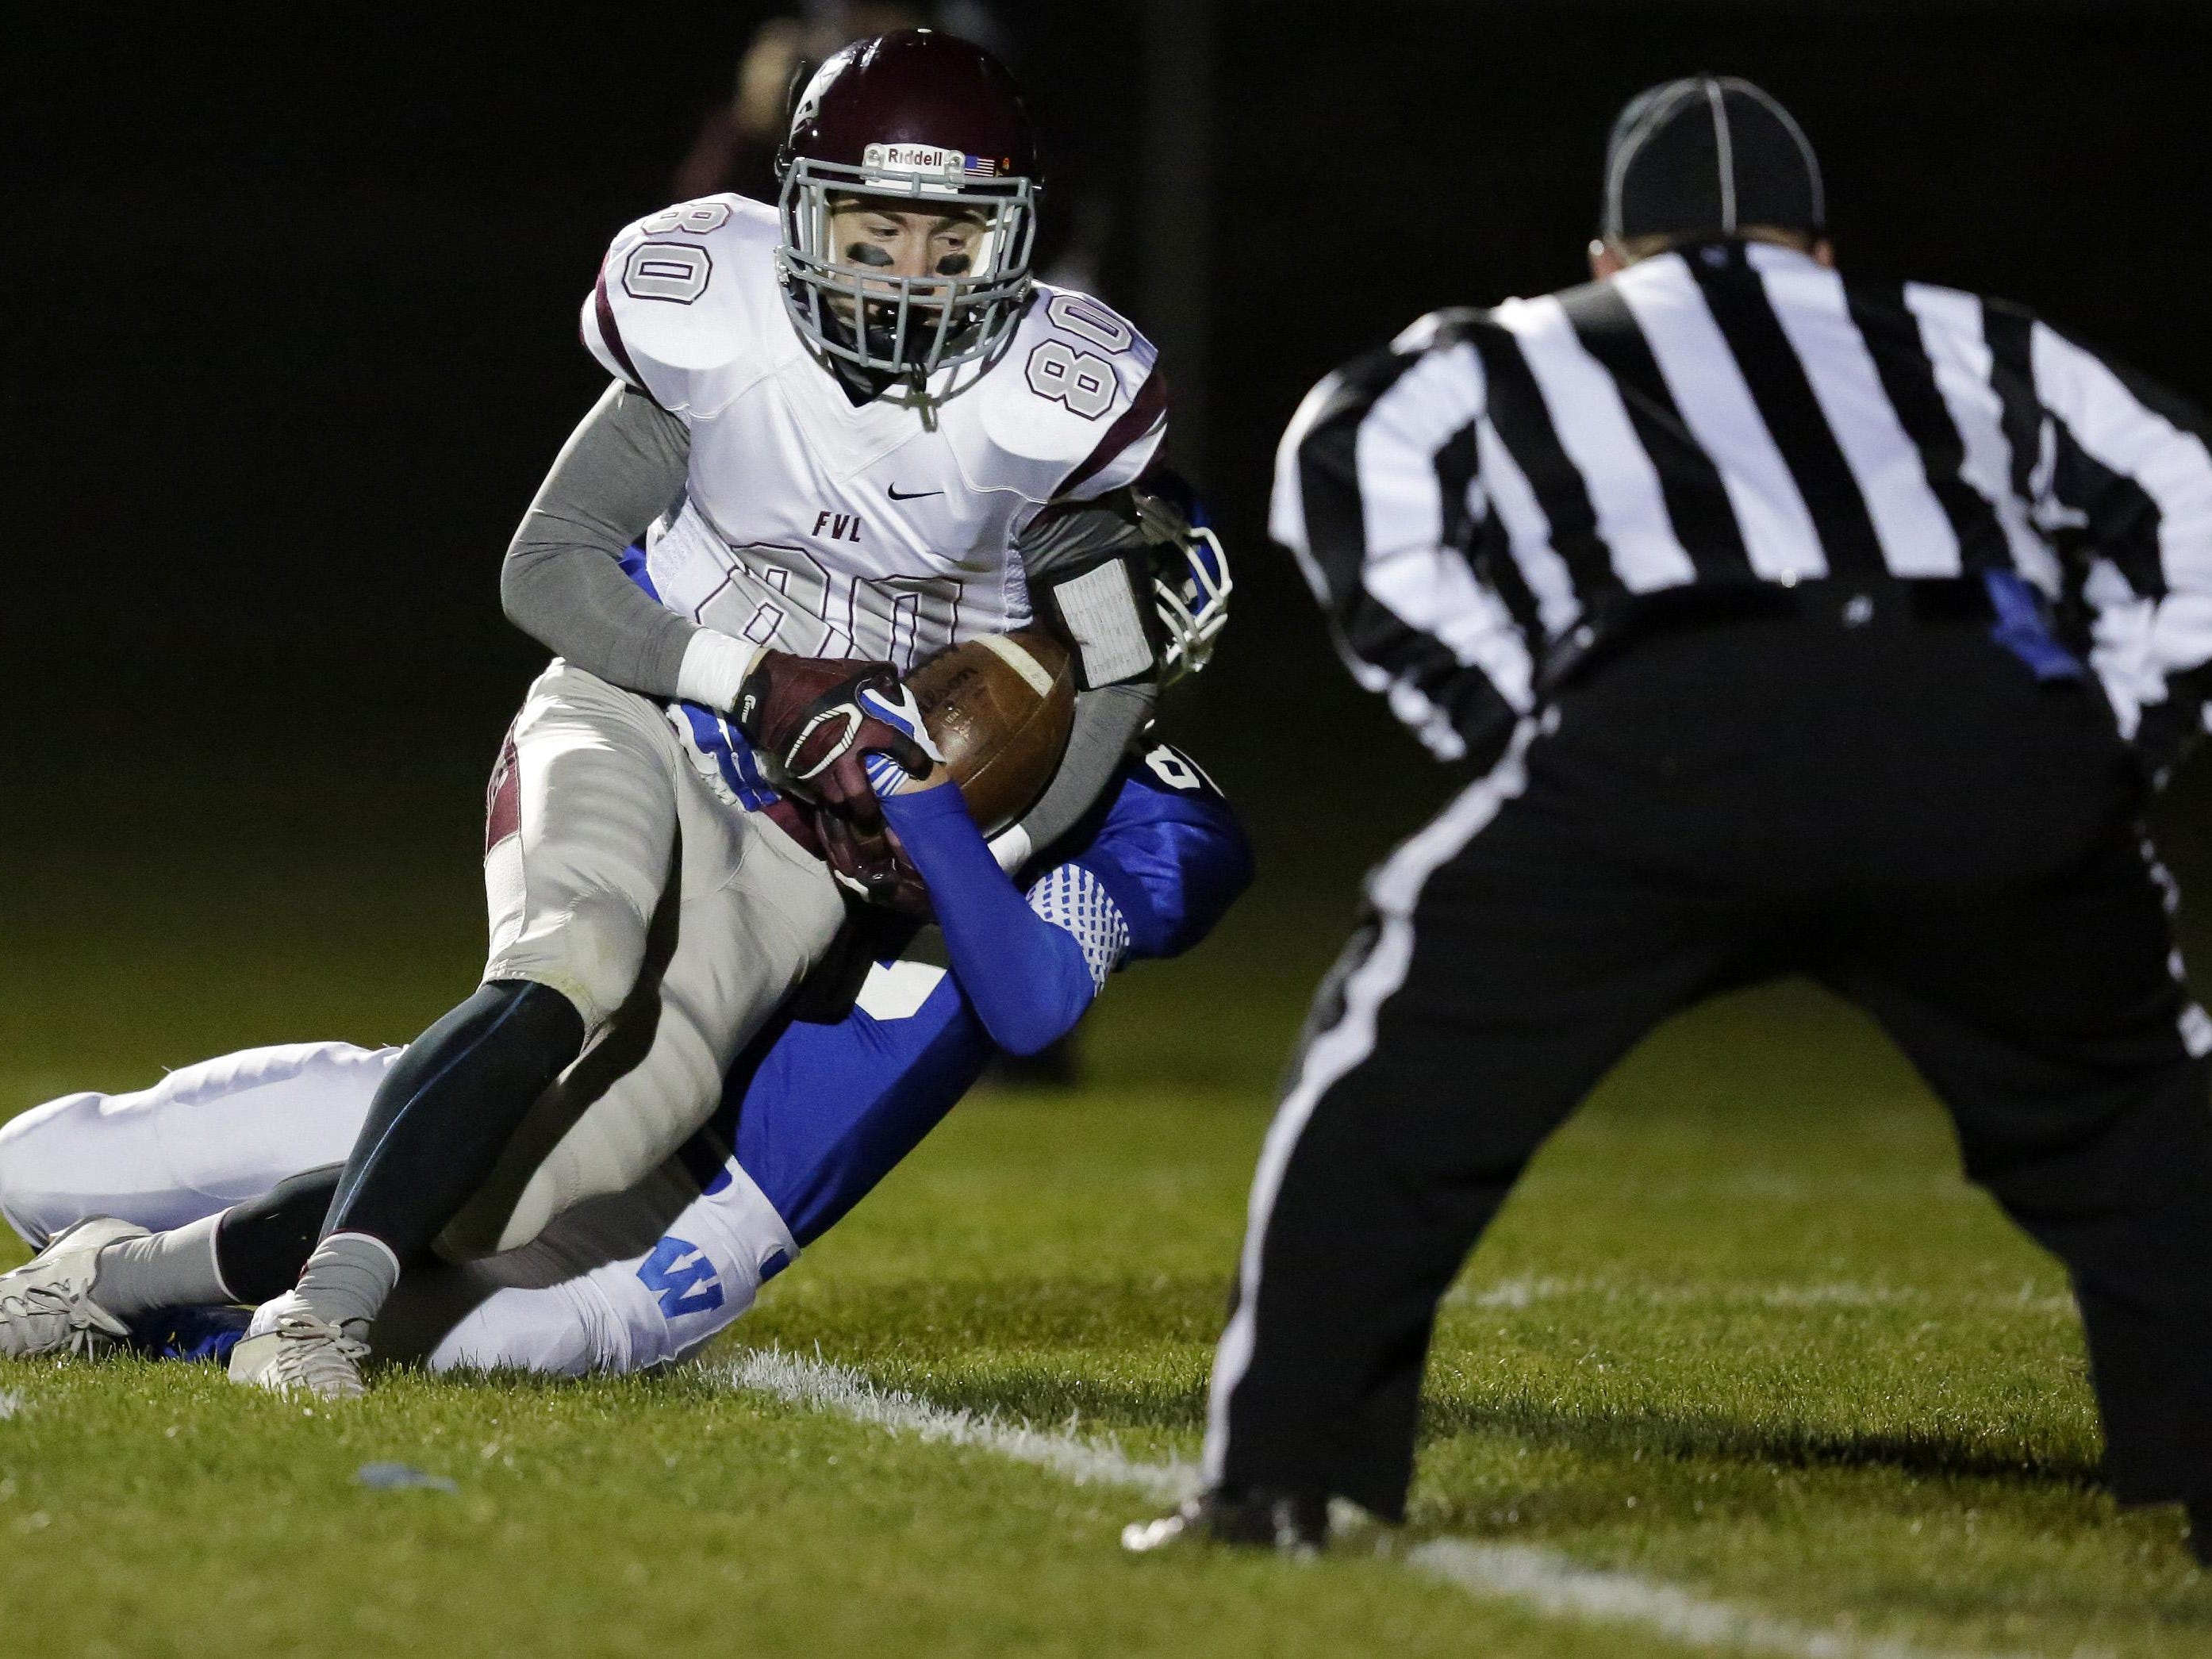 Benjamin Gucinski of Fox Valley Lutheran scores while being tackled by Austin DeCleene of Wrightstown on Friday.